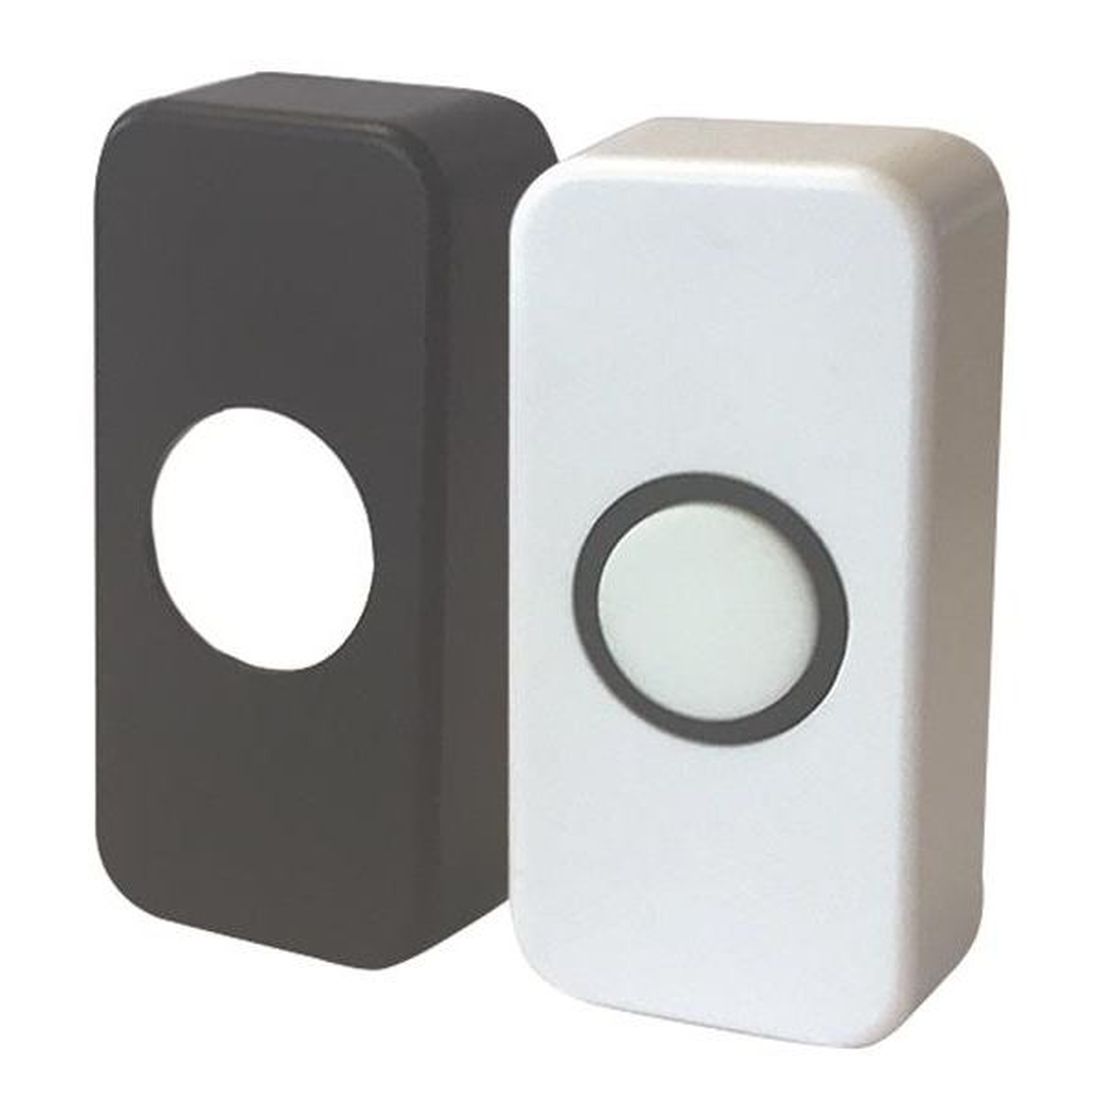 Deta Vimark Bell Push with Black and White Covers                                           